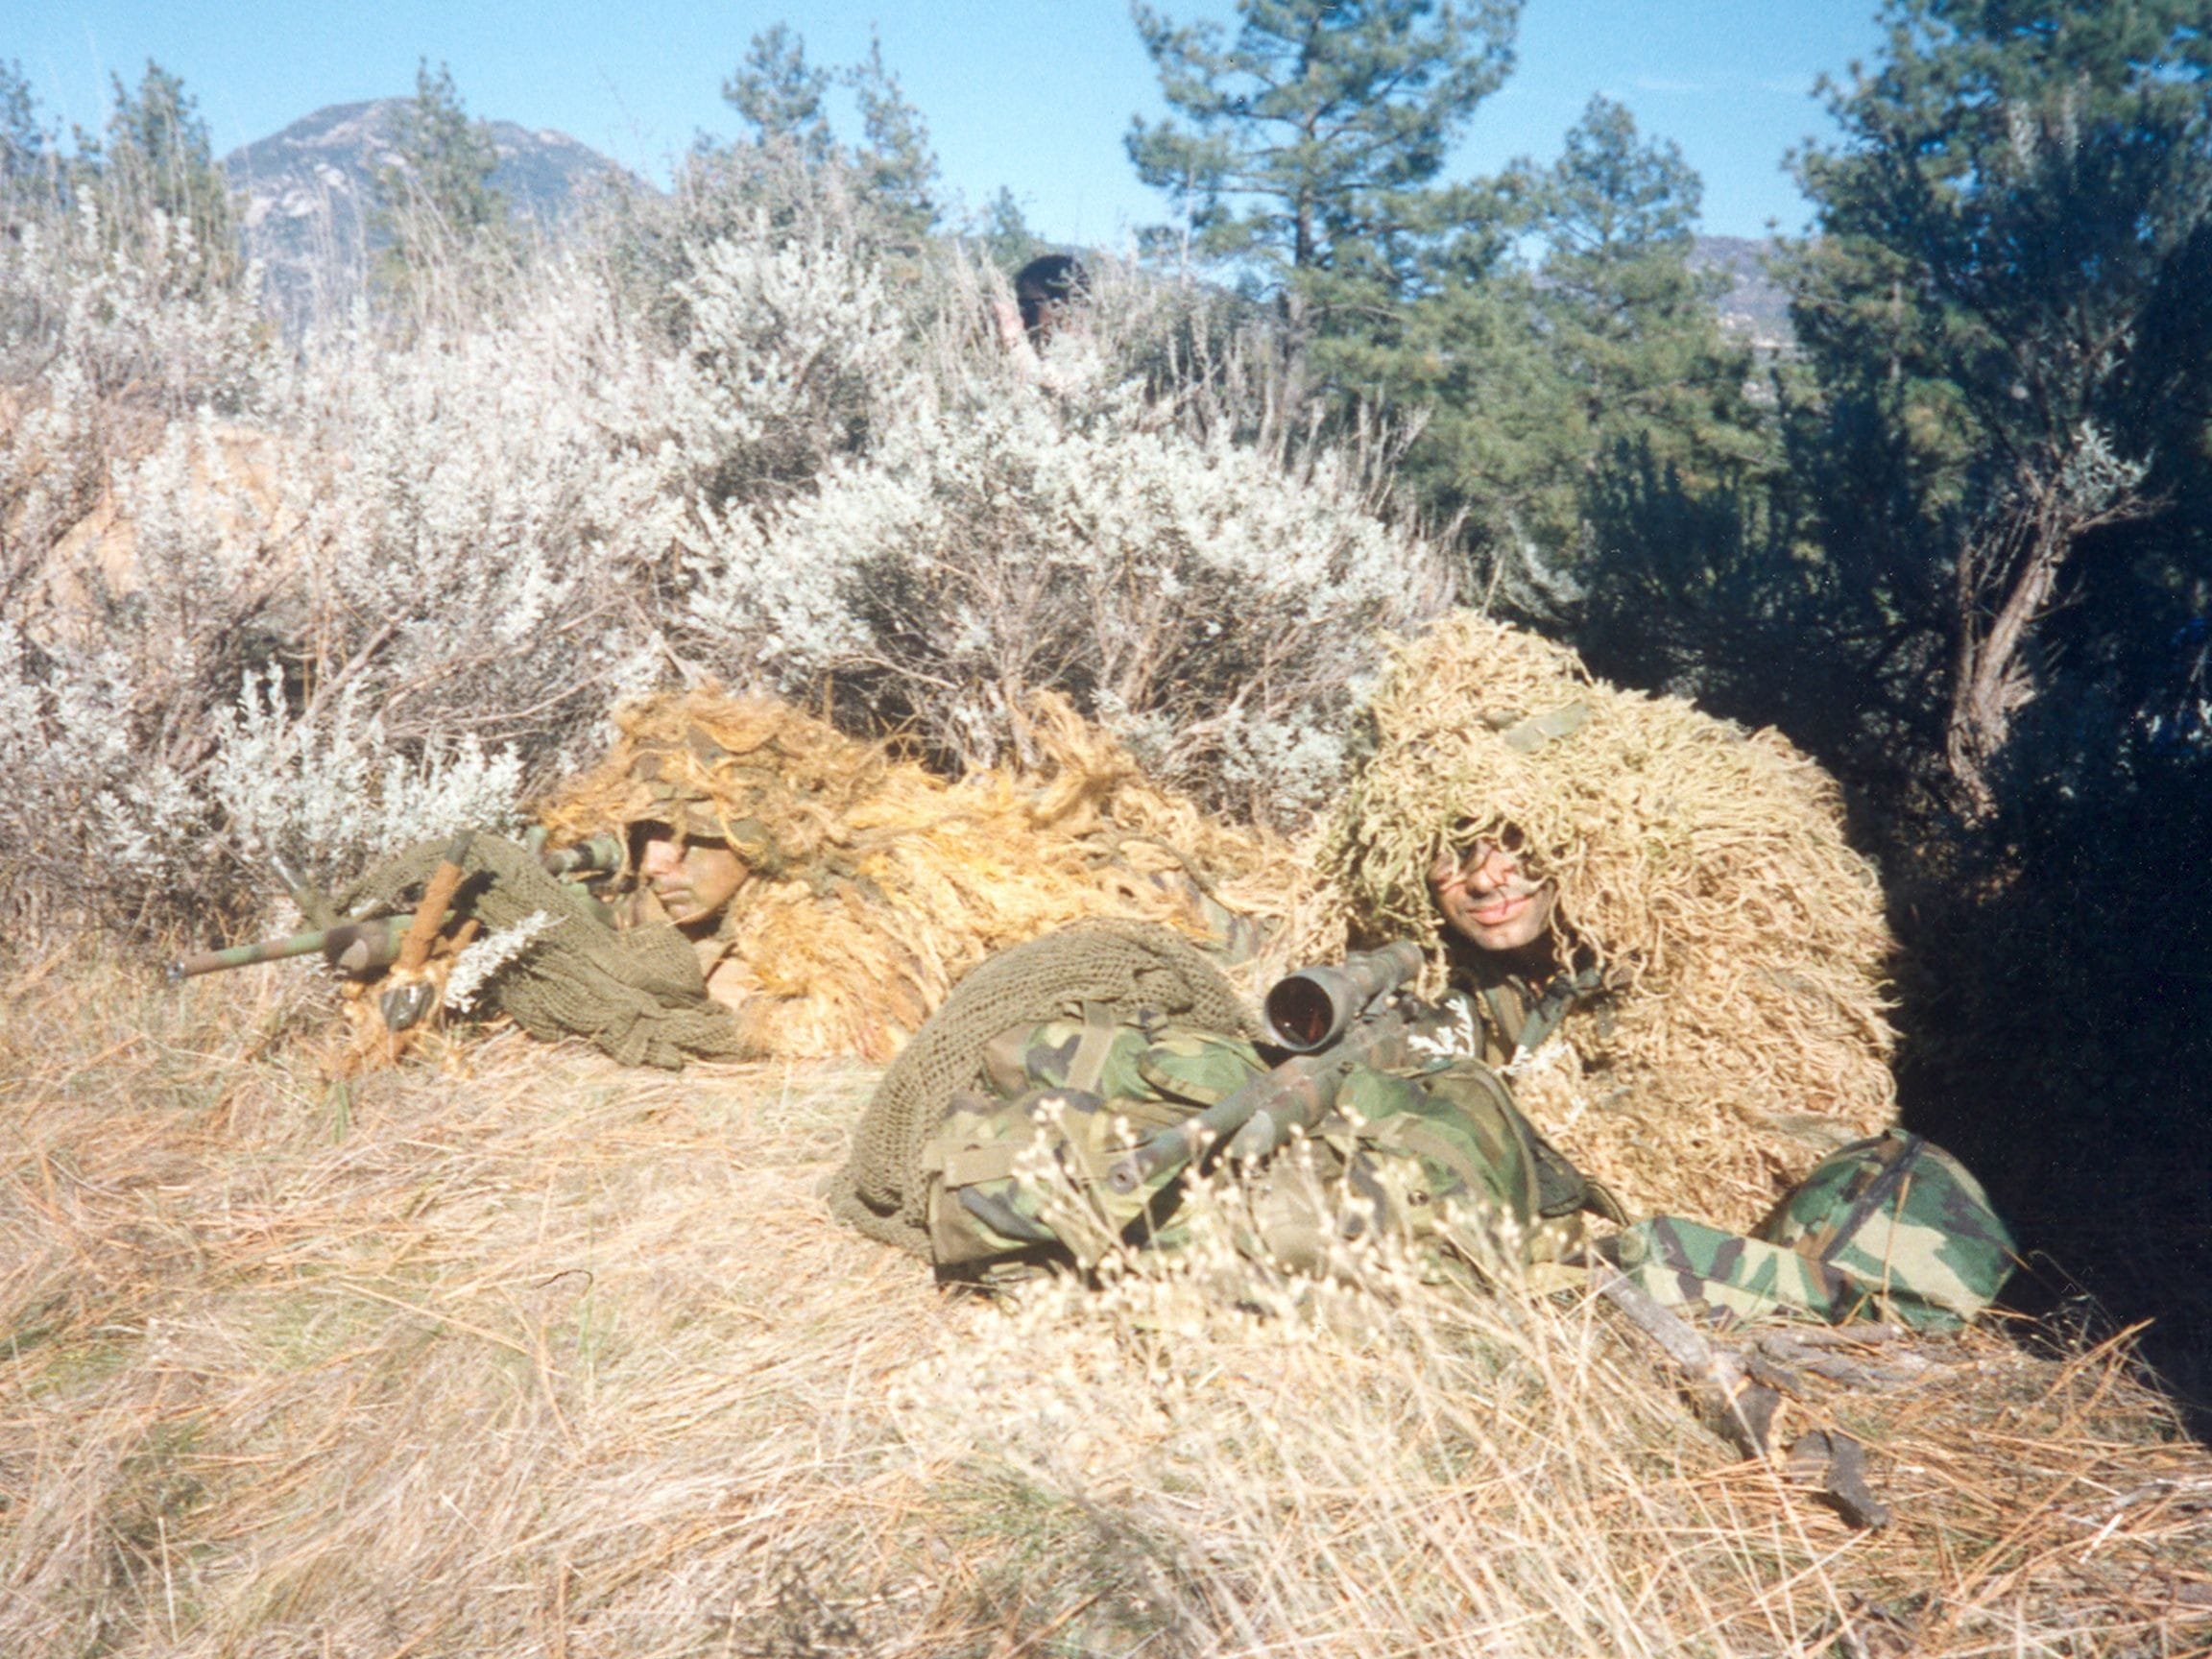 Jim's job on the team required that he be trained as a scout/sniper for intelligence gathering purposes. Jim (right) is shown here during sniper training.